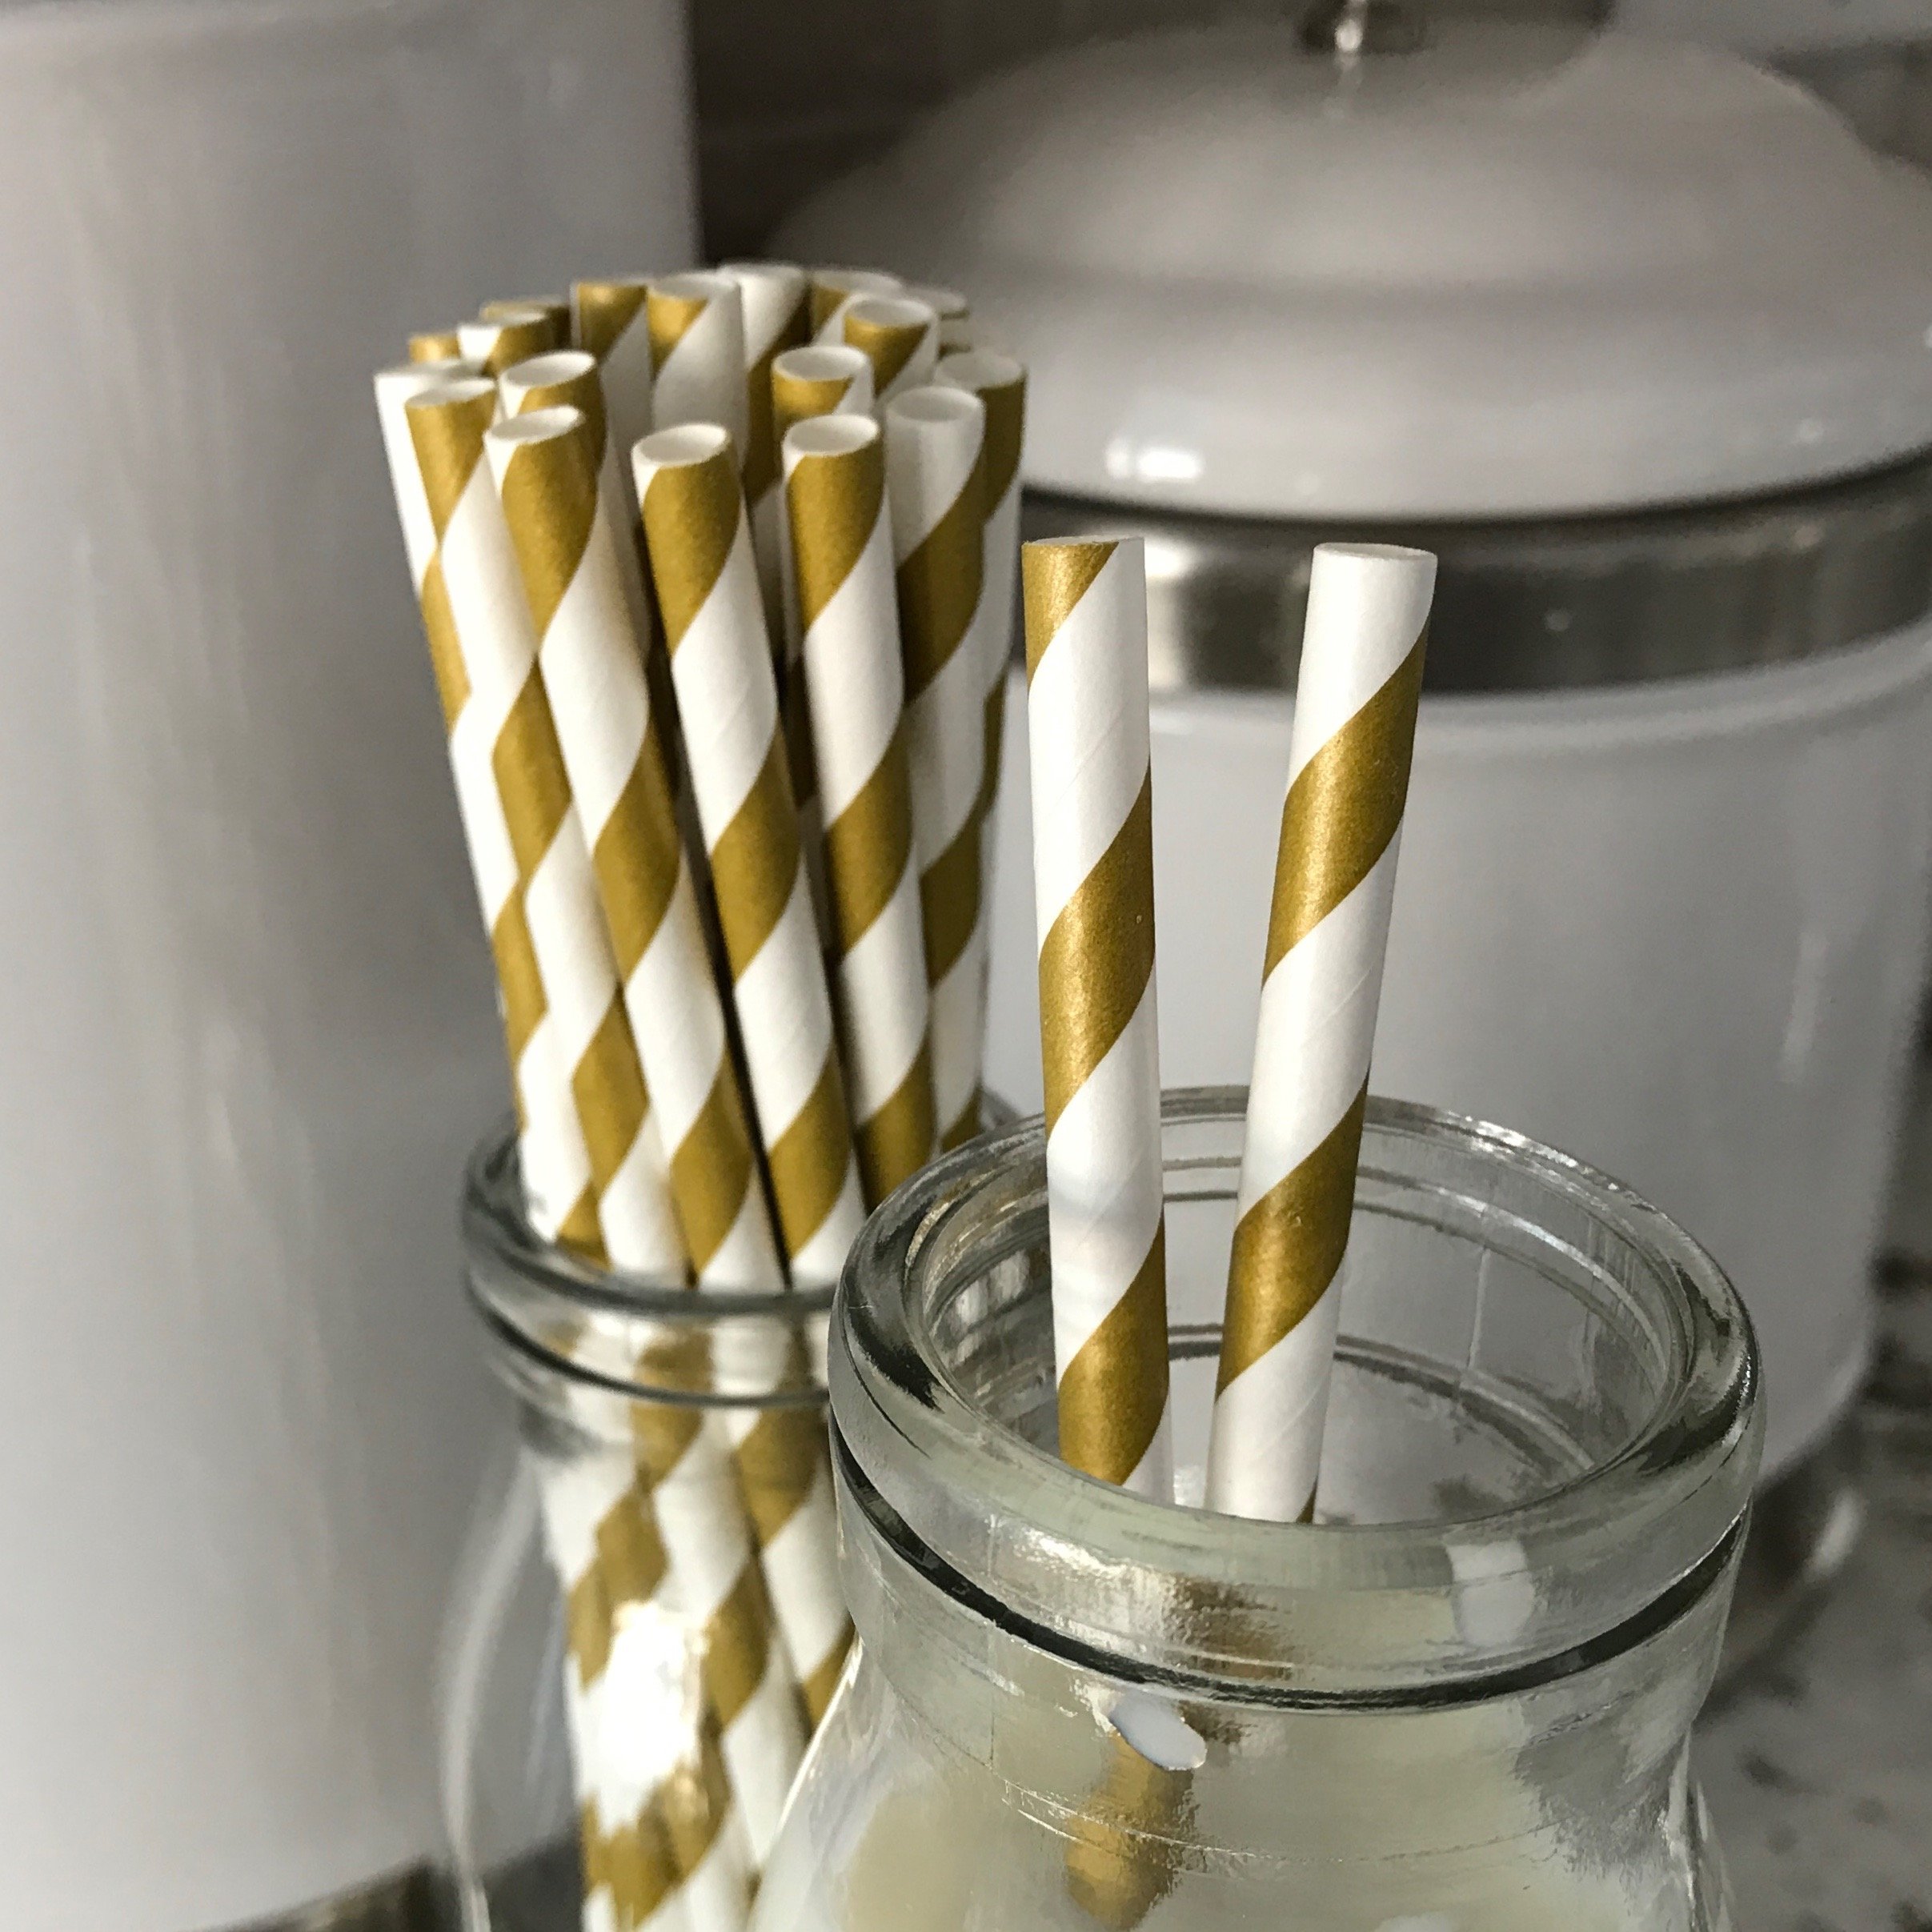 Striped Paper Straws - Gold White - Christmas Holiday Wedding Anniversary Supply - 7.75 Inches - 50 Pack - Outside the Box Papers Brand